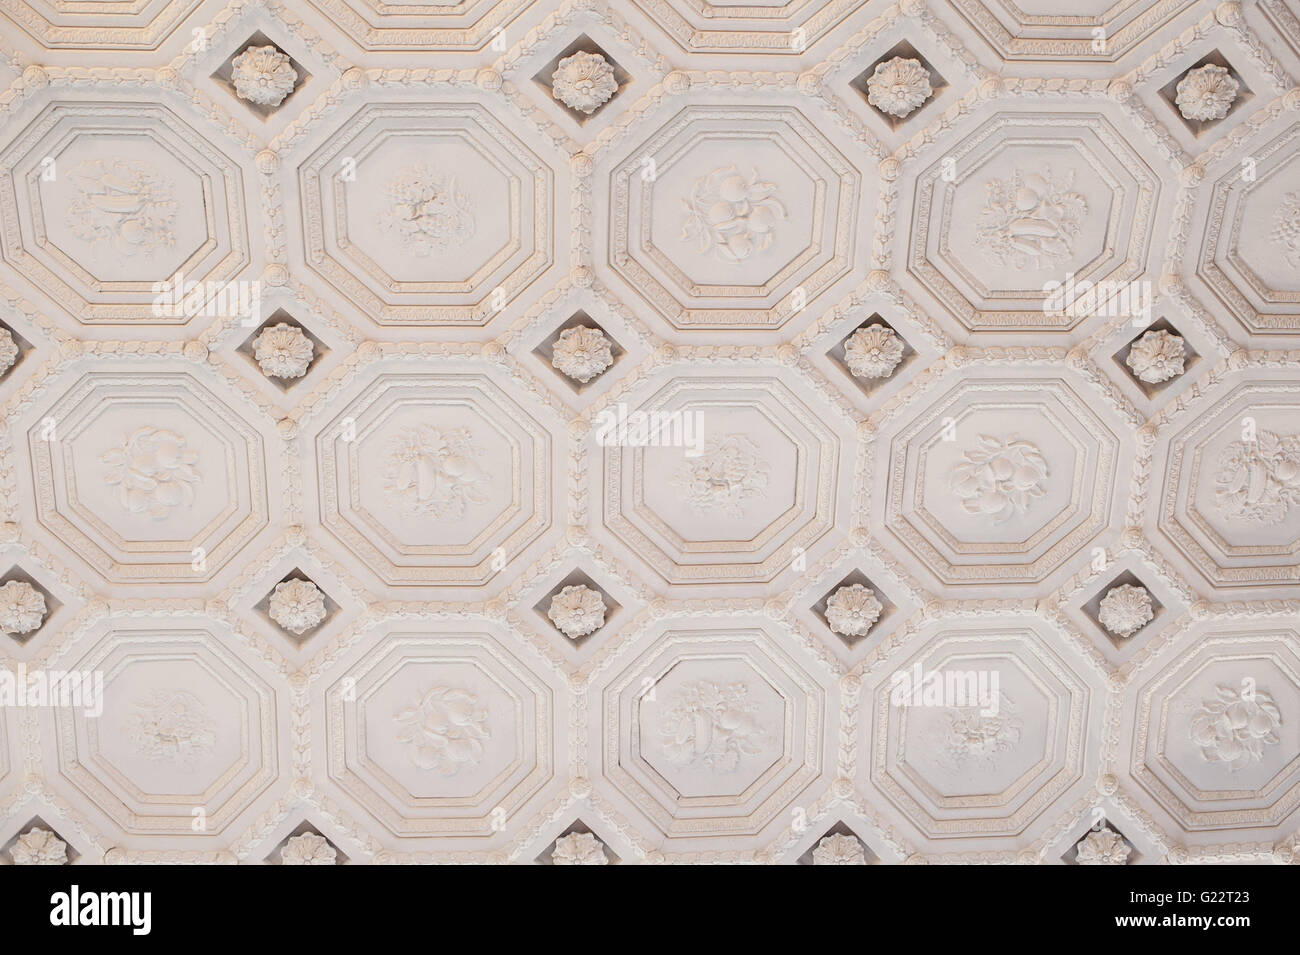 vintage architectural texture of the ceiling in a classic style Stock Photo